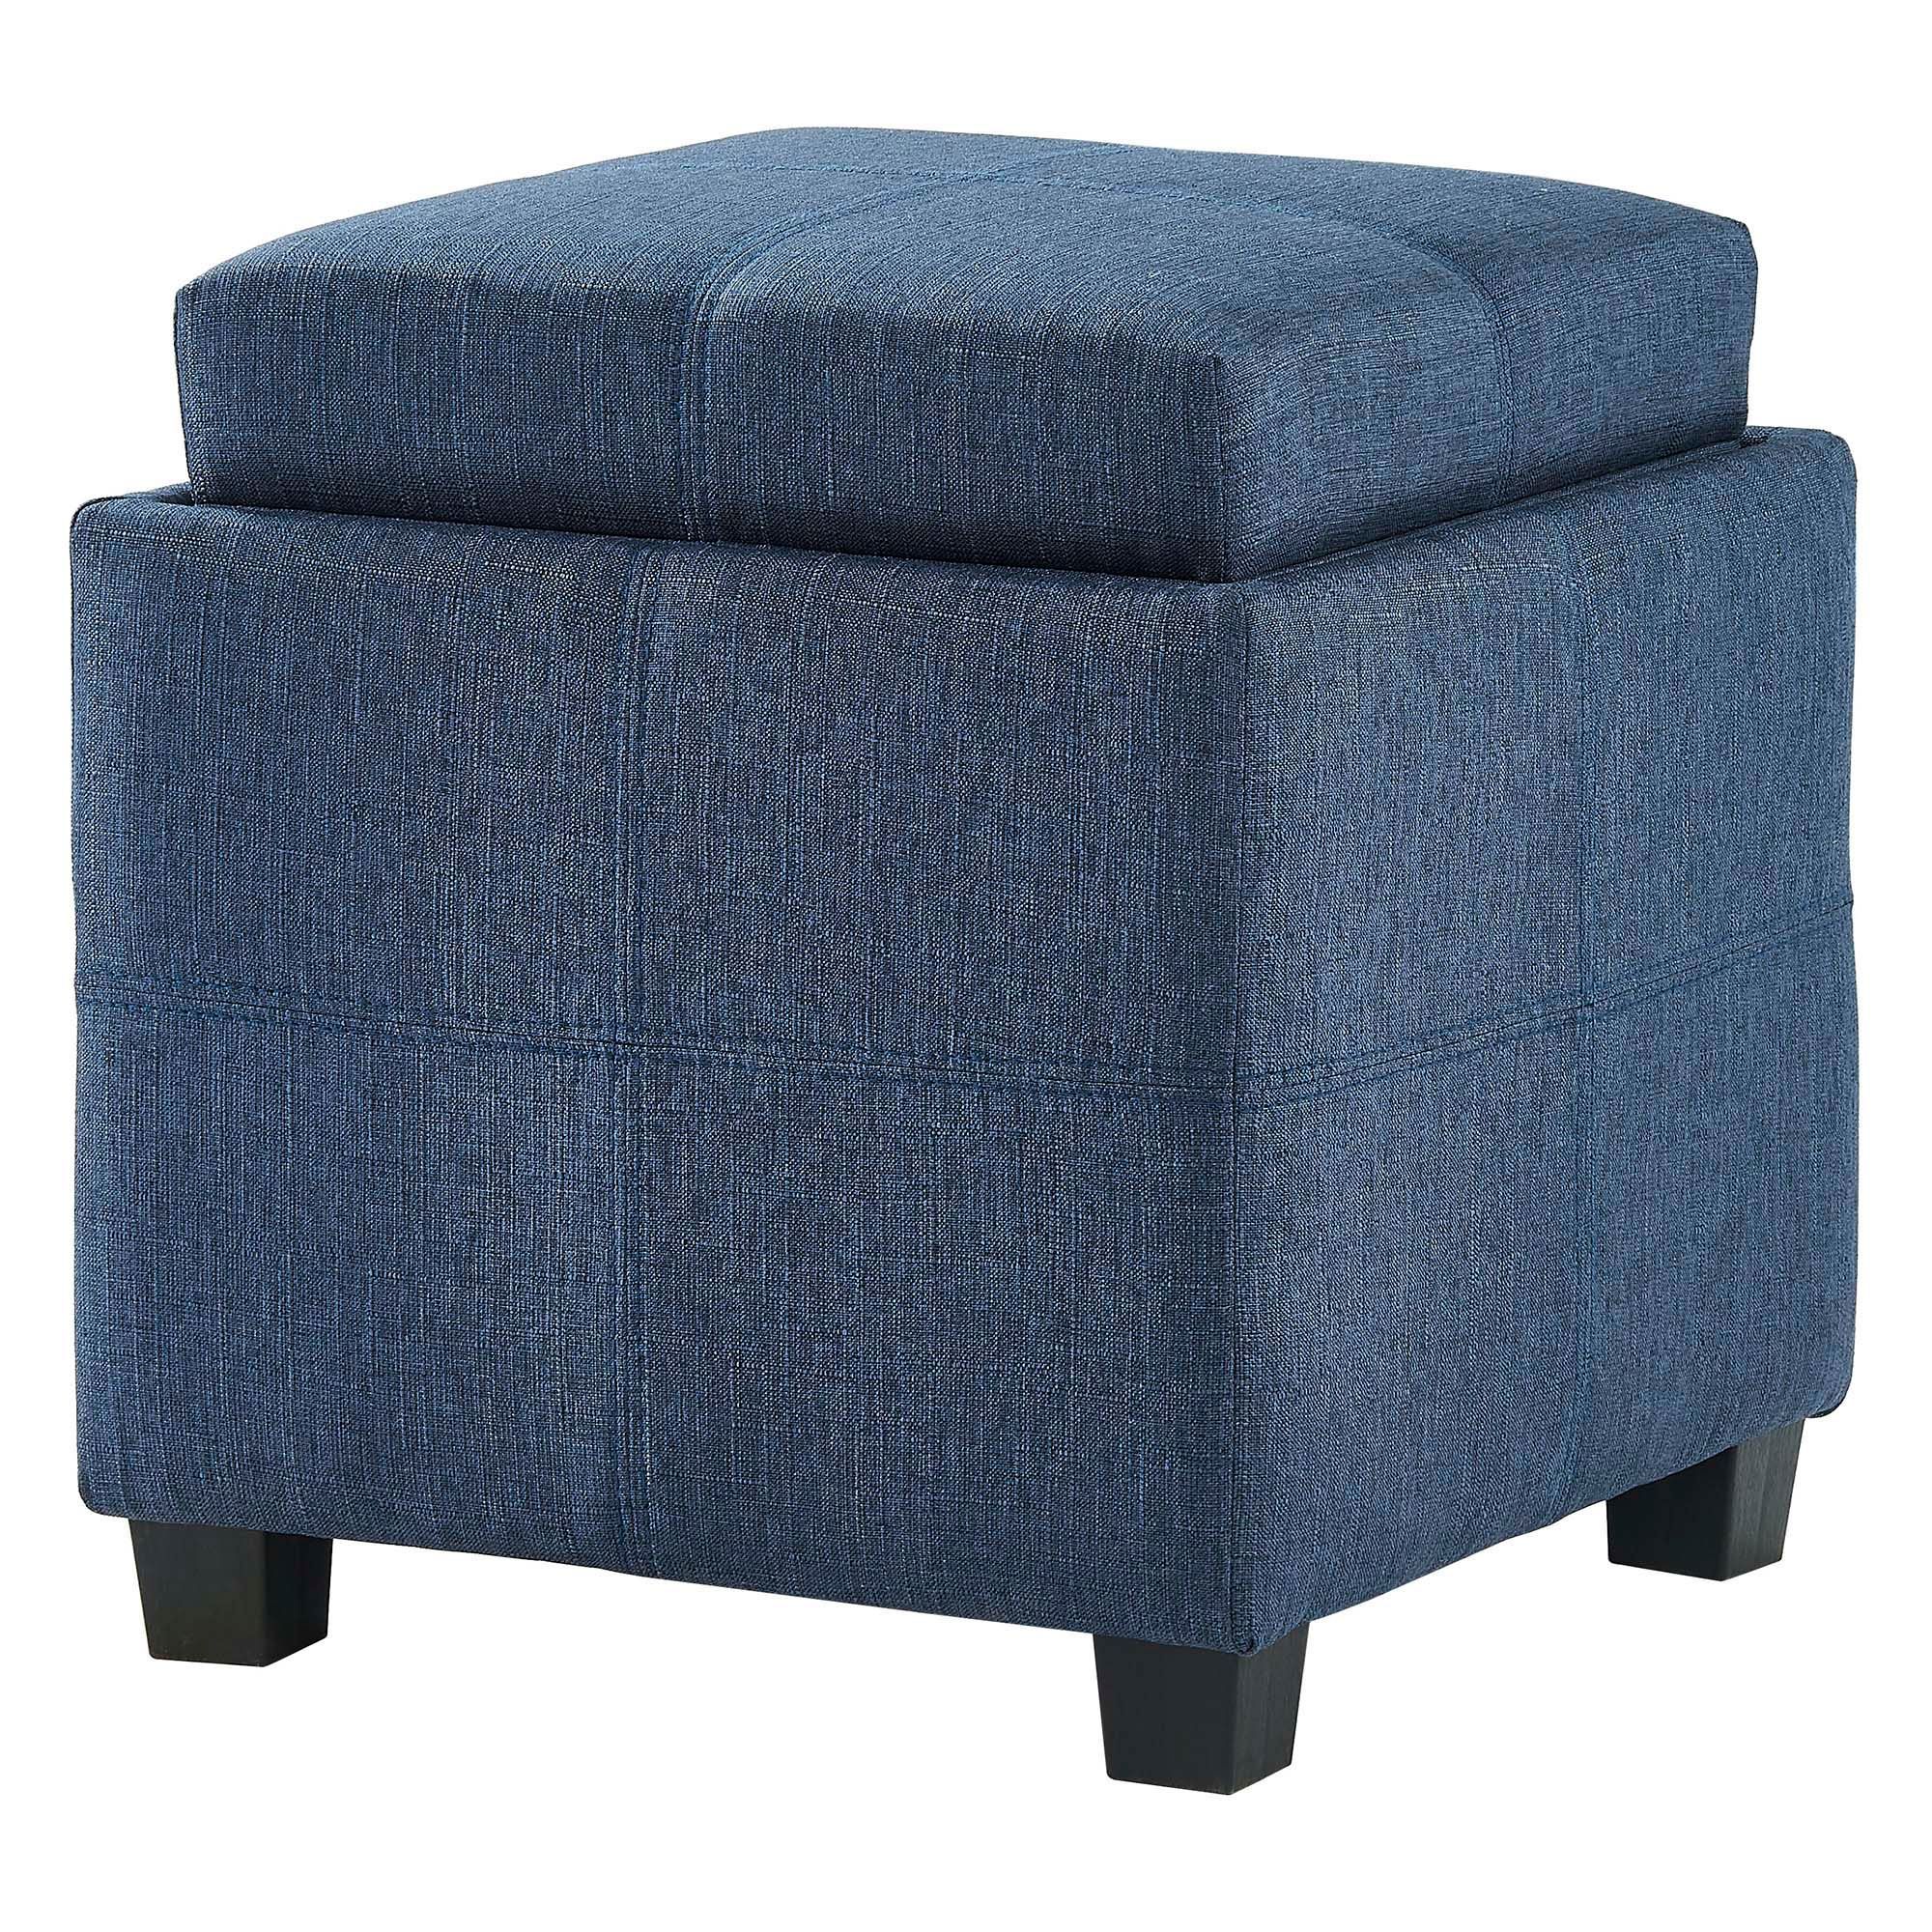 19" Blue And Gray Transitional Square Storage Ottoman With Reversible For Blue Fabric Storage Ottomans (View 7 of 20)